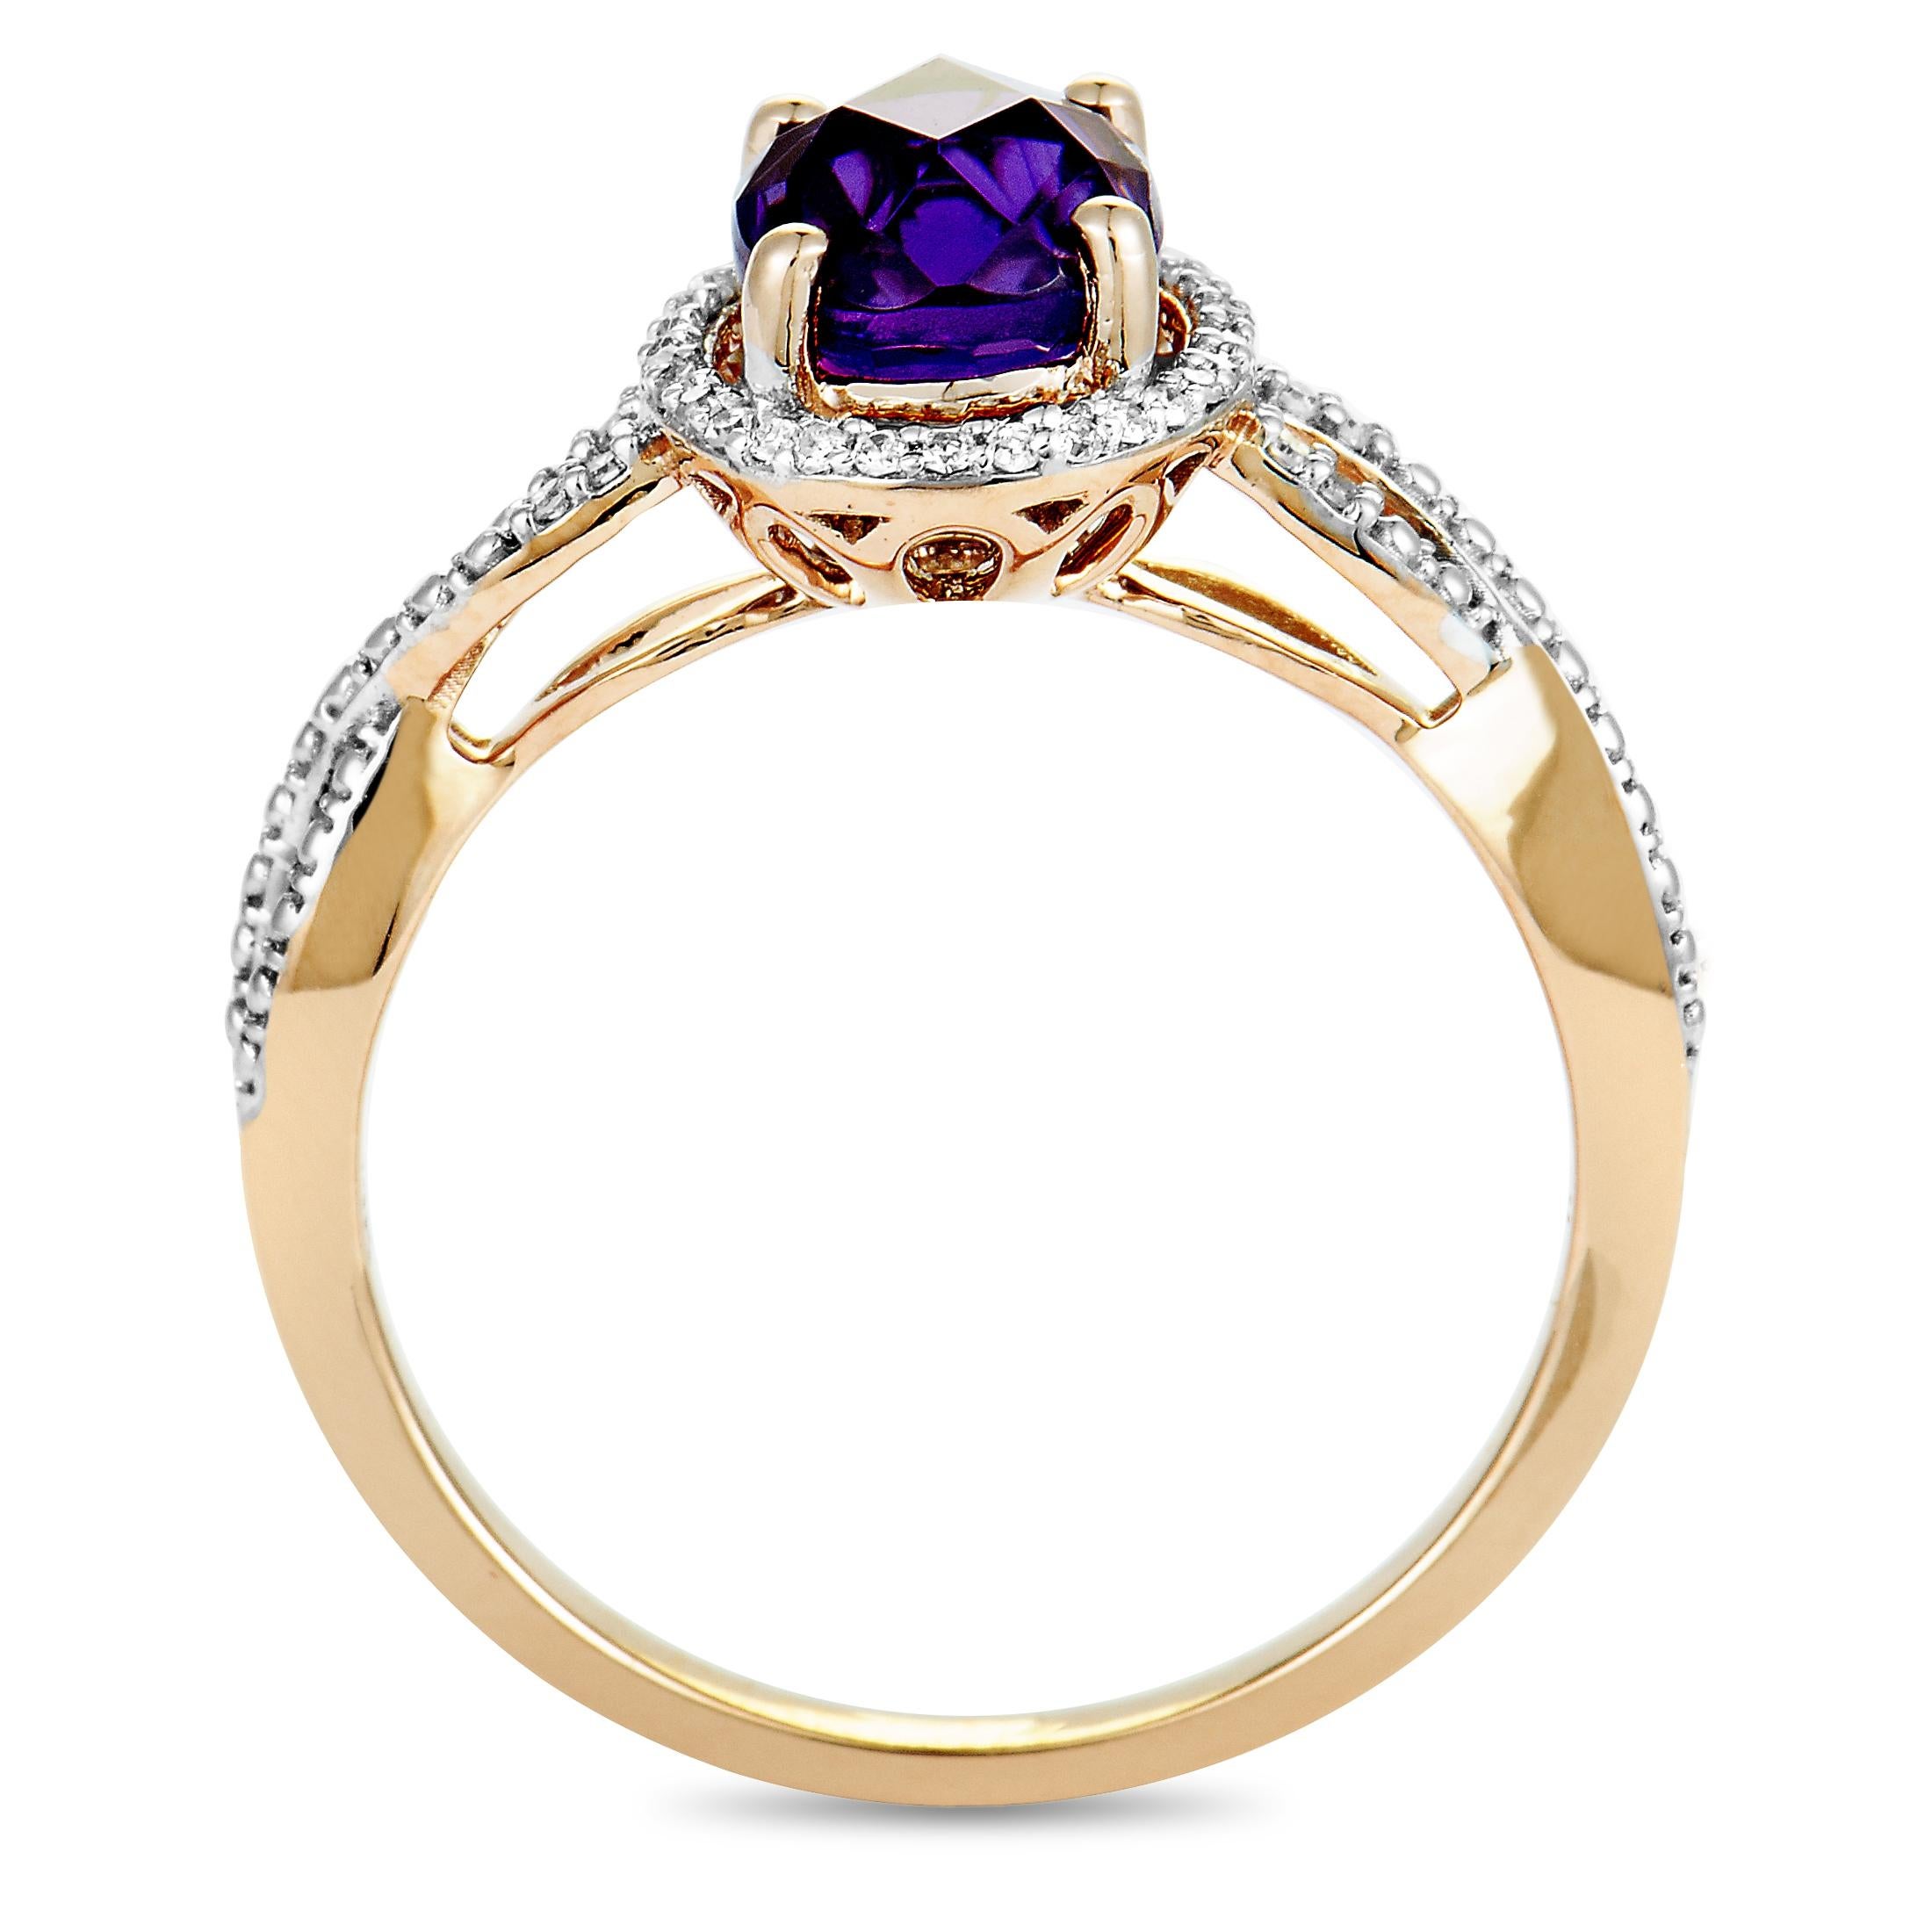 This ring is crafted from 14K rose gold and weighs 2.9 grams. It is set with an amethyst and a total of 0.10 carats of diamonds. The ring boasts band thickness of 1 mm and top height of 7 mm, with top dimensions measuring 20 by 10 mm.
 
 Offered in